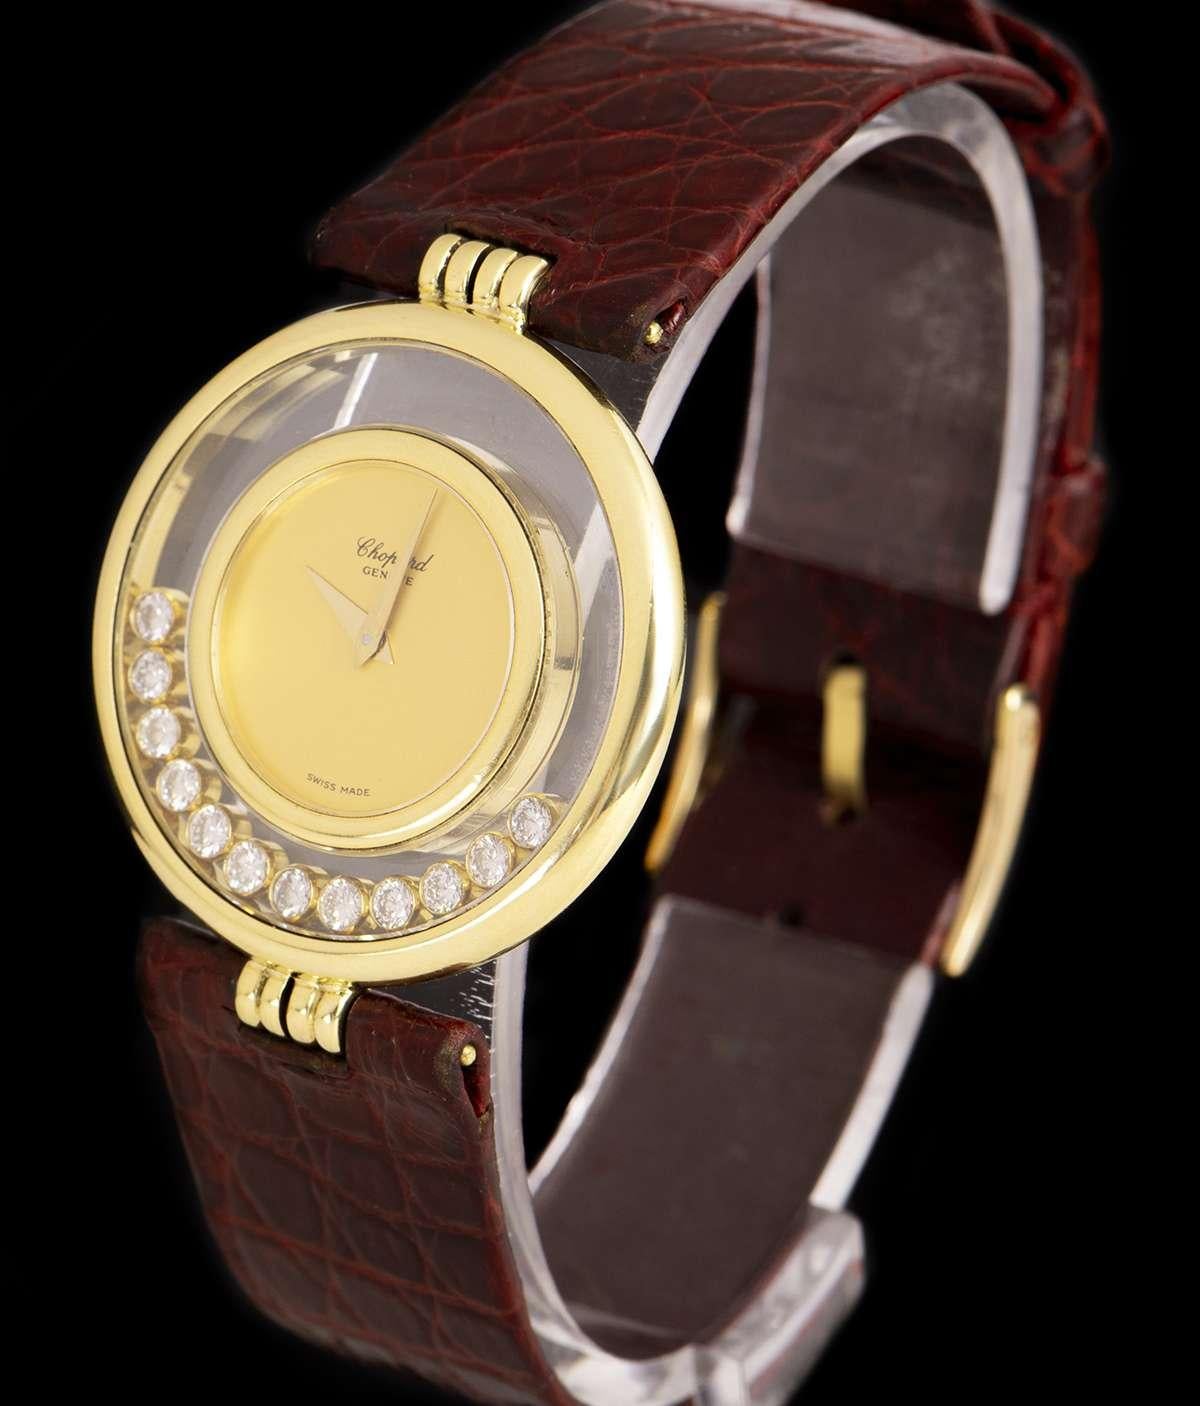  A 31 mm  18k Yellow Gold Happy Diamonds Ladies Wristwatch, champagne dial, a fixed 18k yellow gold inner bezel, a fixed 18k yellow gold outer bezel, 12 floating rubover round brilliant cut diamonds in between both bezels, an original maroon leather